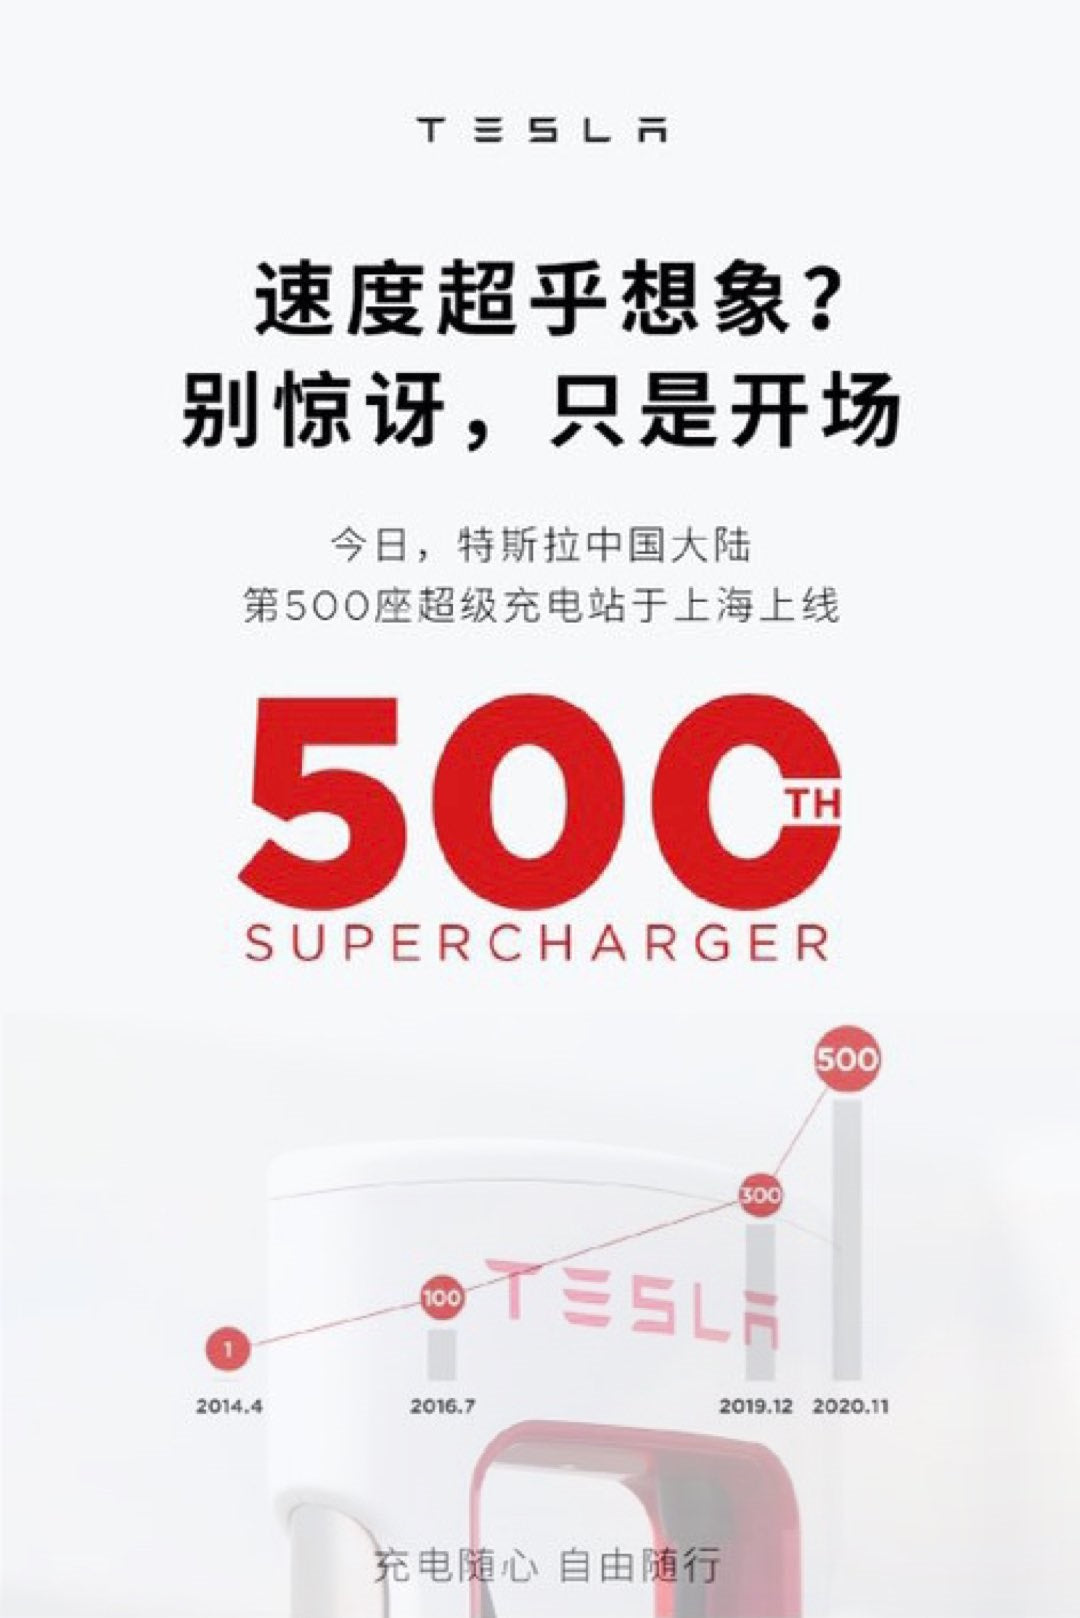 Tesla Celebrates Grand Opening of 500th Supercharger in Mainland China as its EV Demand Continues to Soar